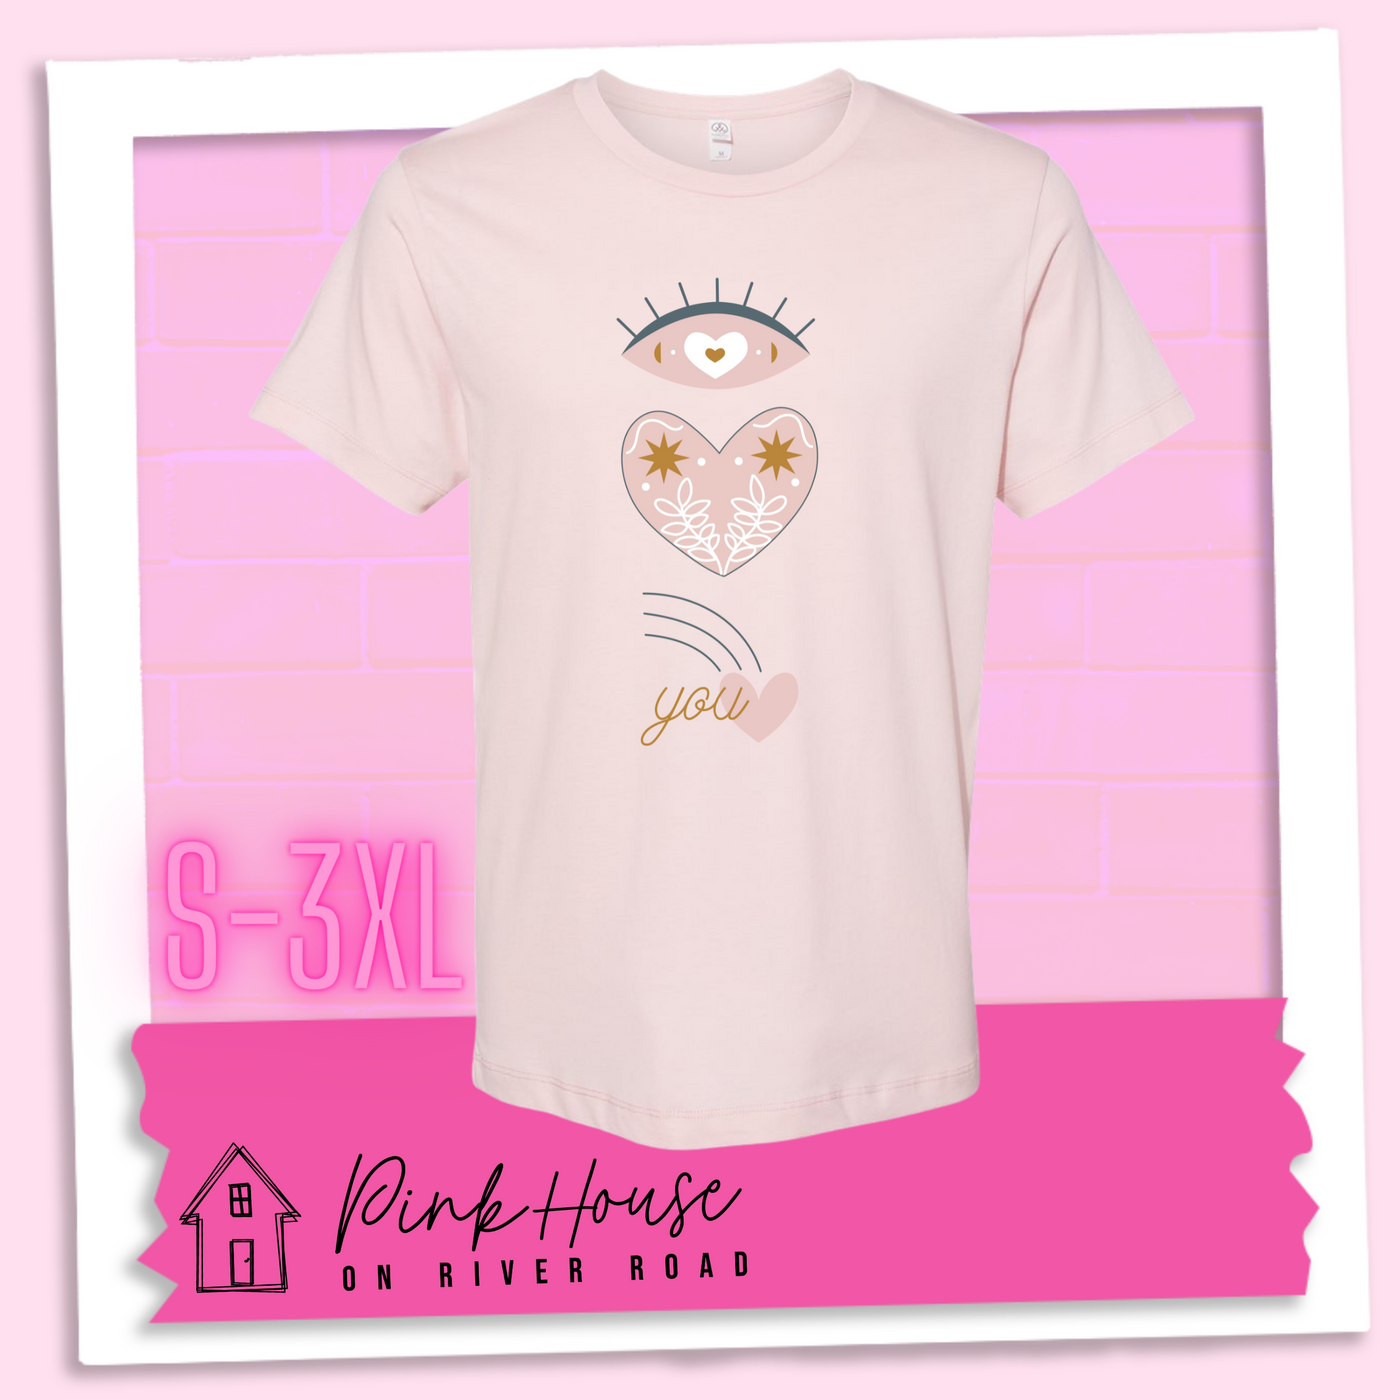 Faded pink tee with a graphic of an eye with a heart for the pupil and underneath that a heart with a floral and star design and a shooting heart with the word you. The graphic represents eye heart you